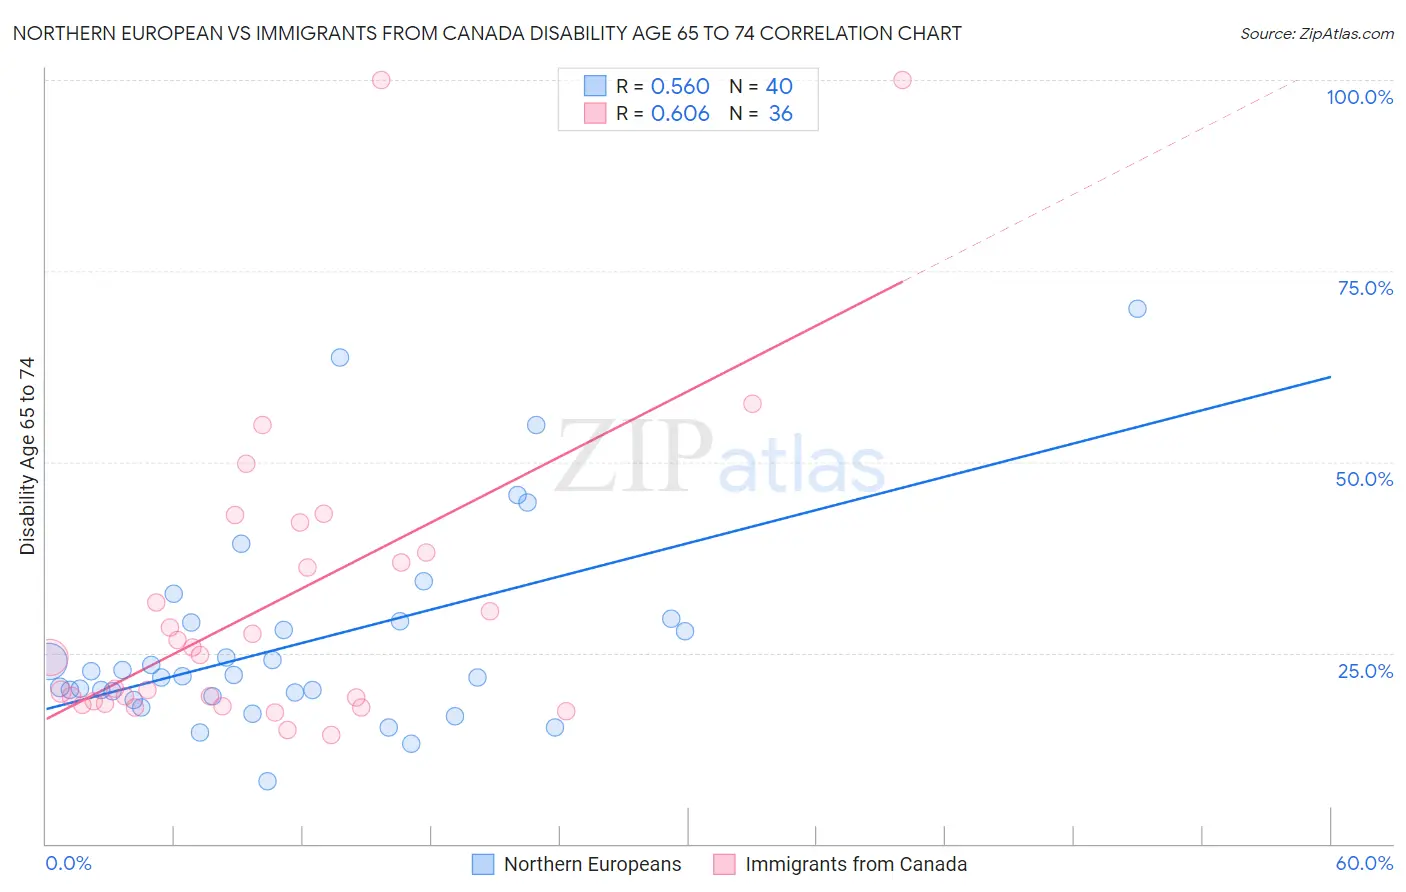 Northern European vs Immigrants from Canada Disability Age 65 to 74